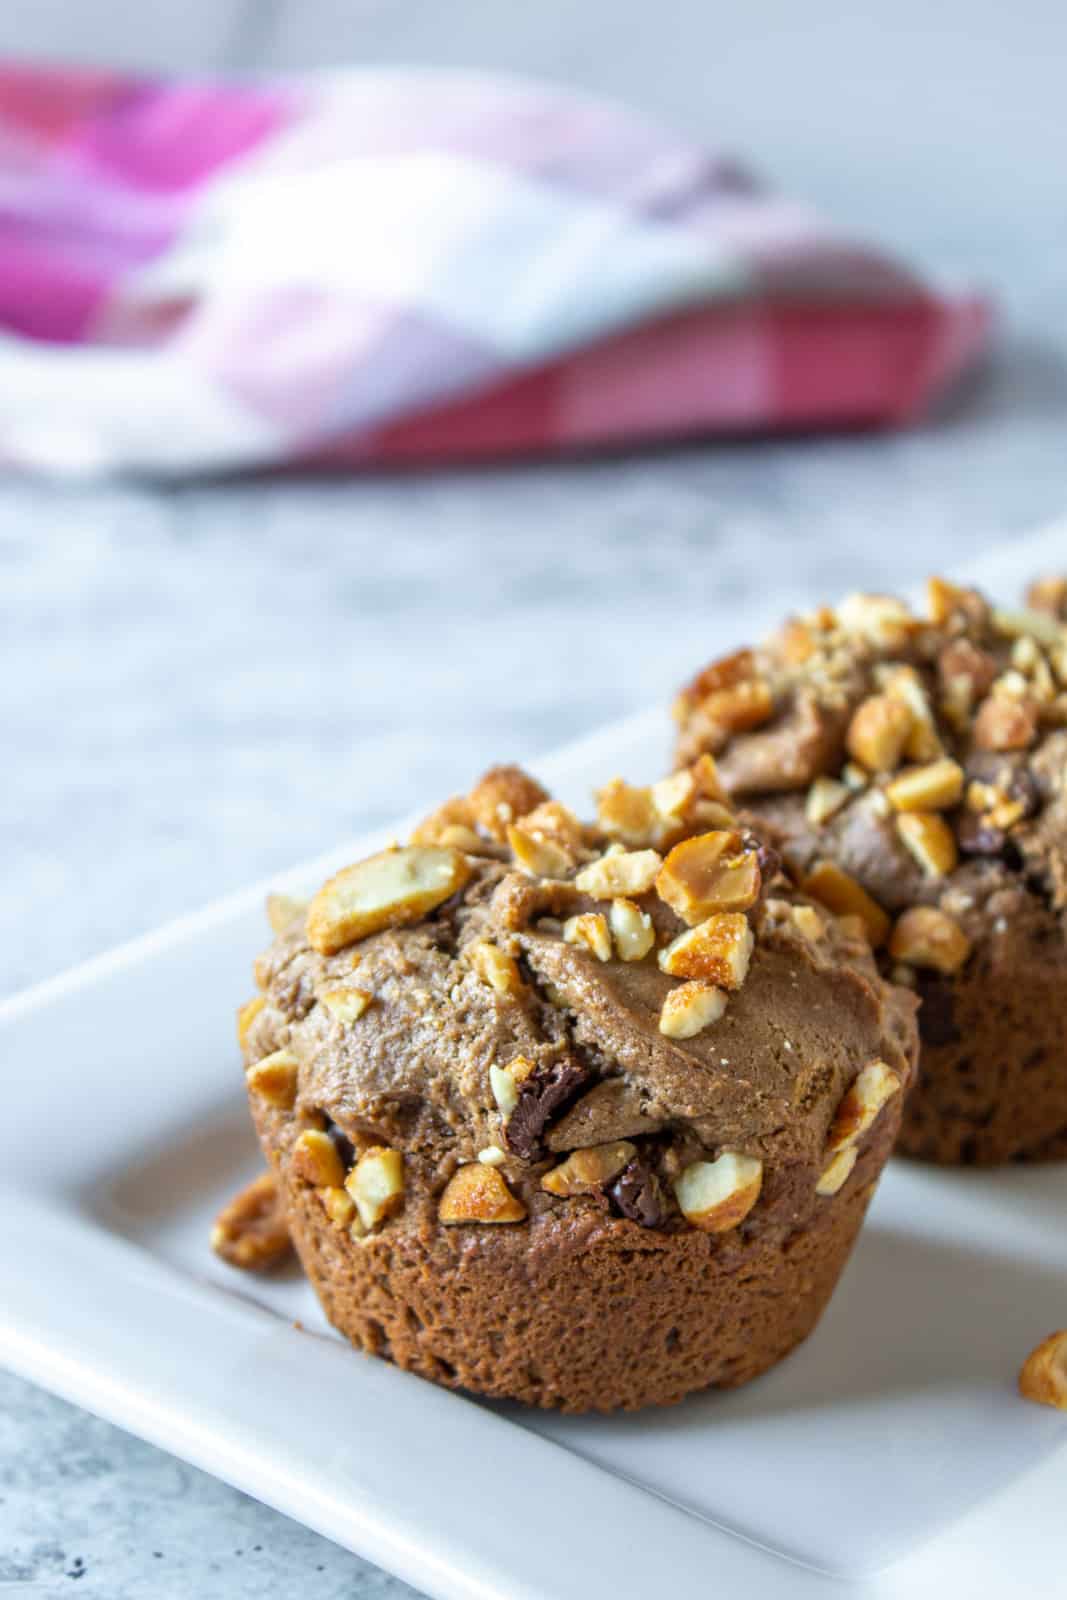 Peanut butter muffins topped with chopped peanuts.